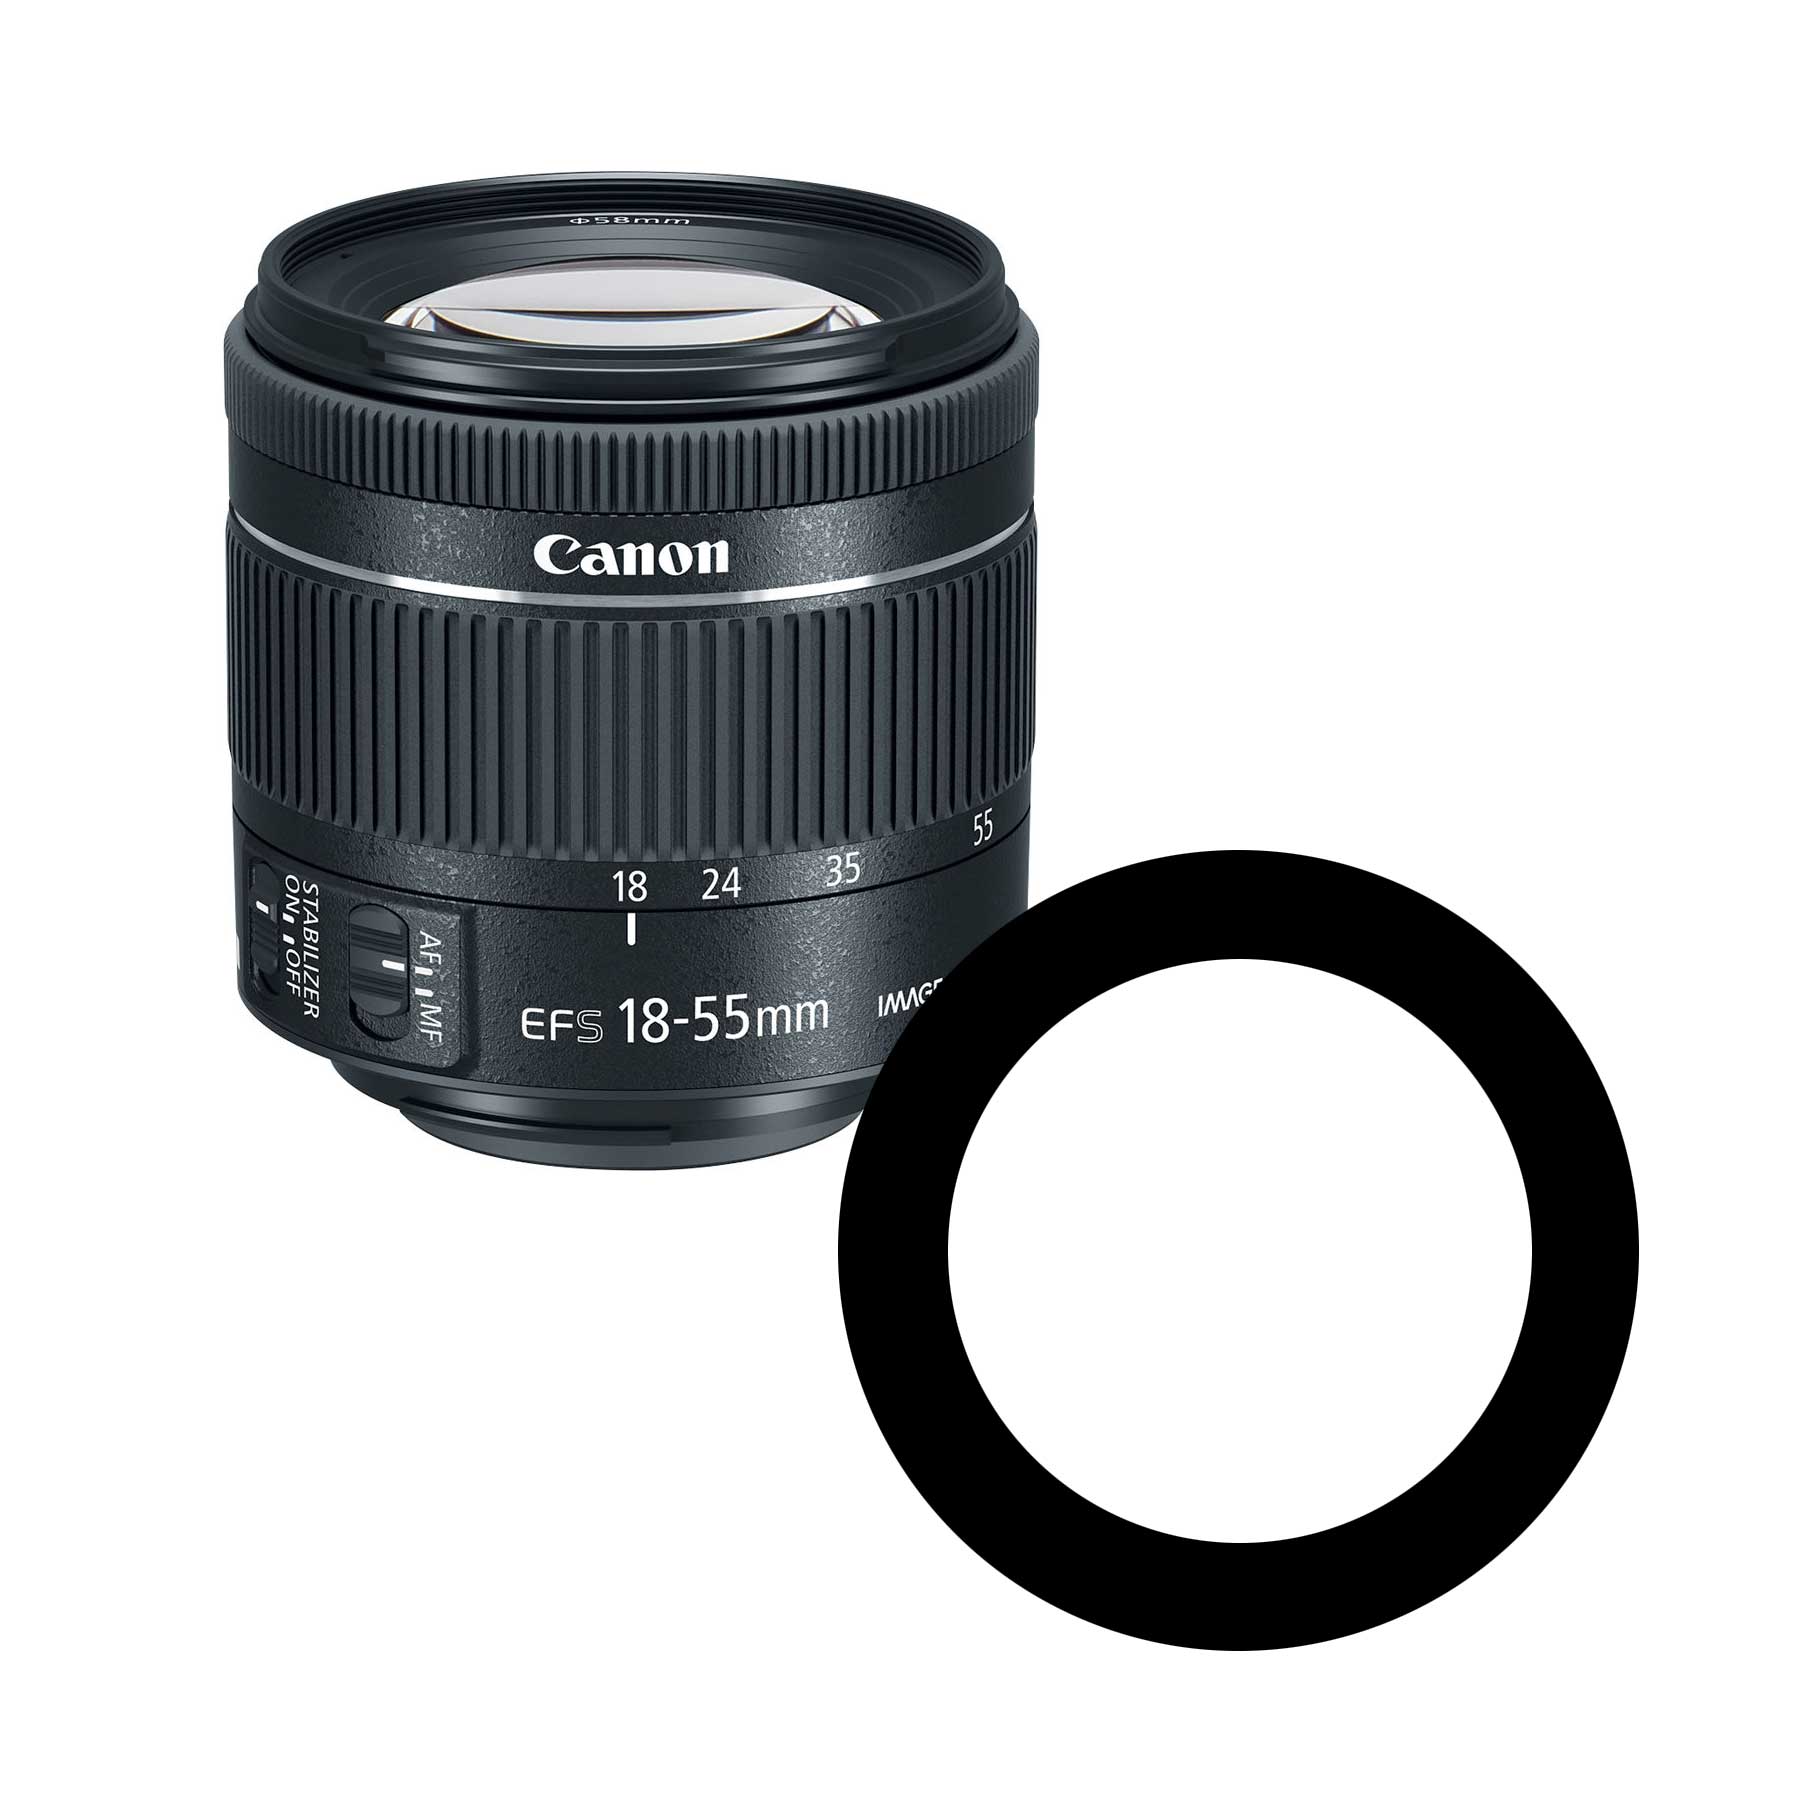 Anti-Reflection Ring for Canon 18-55mm Lenses